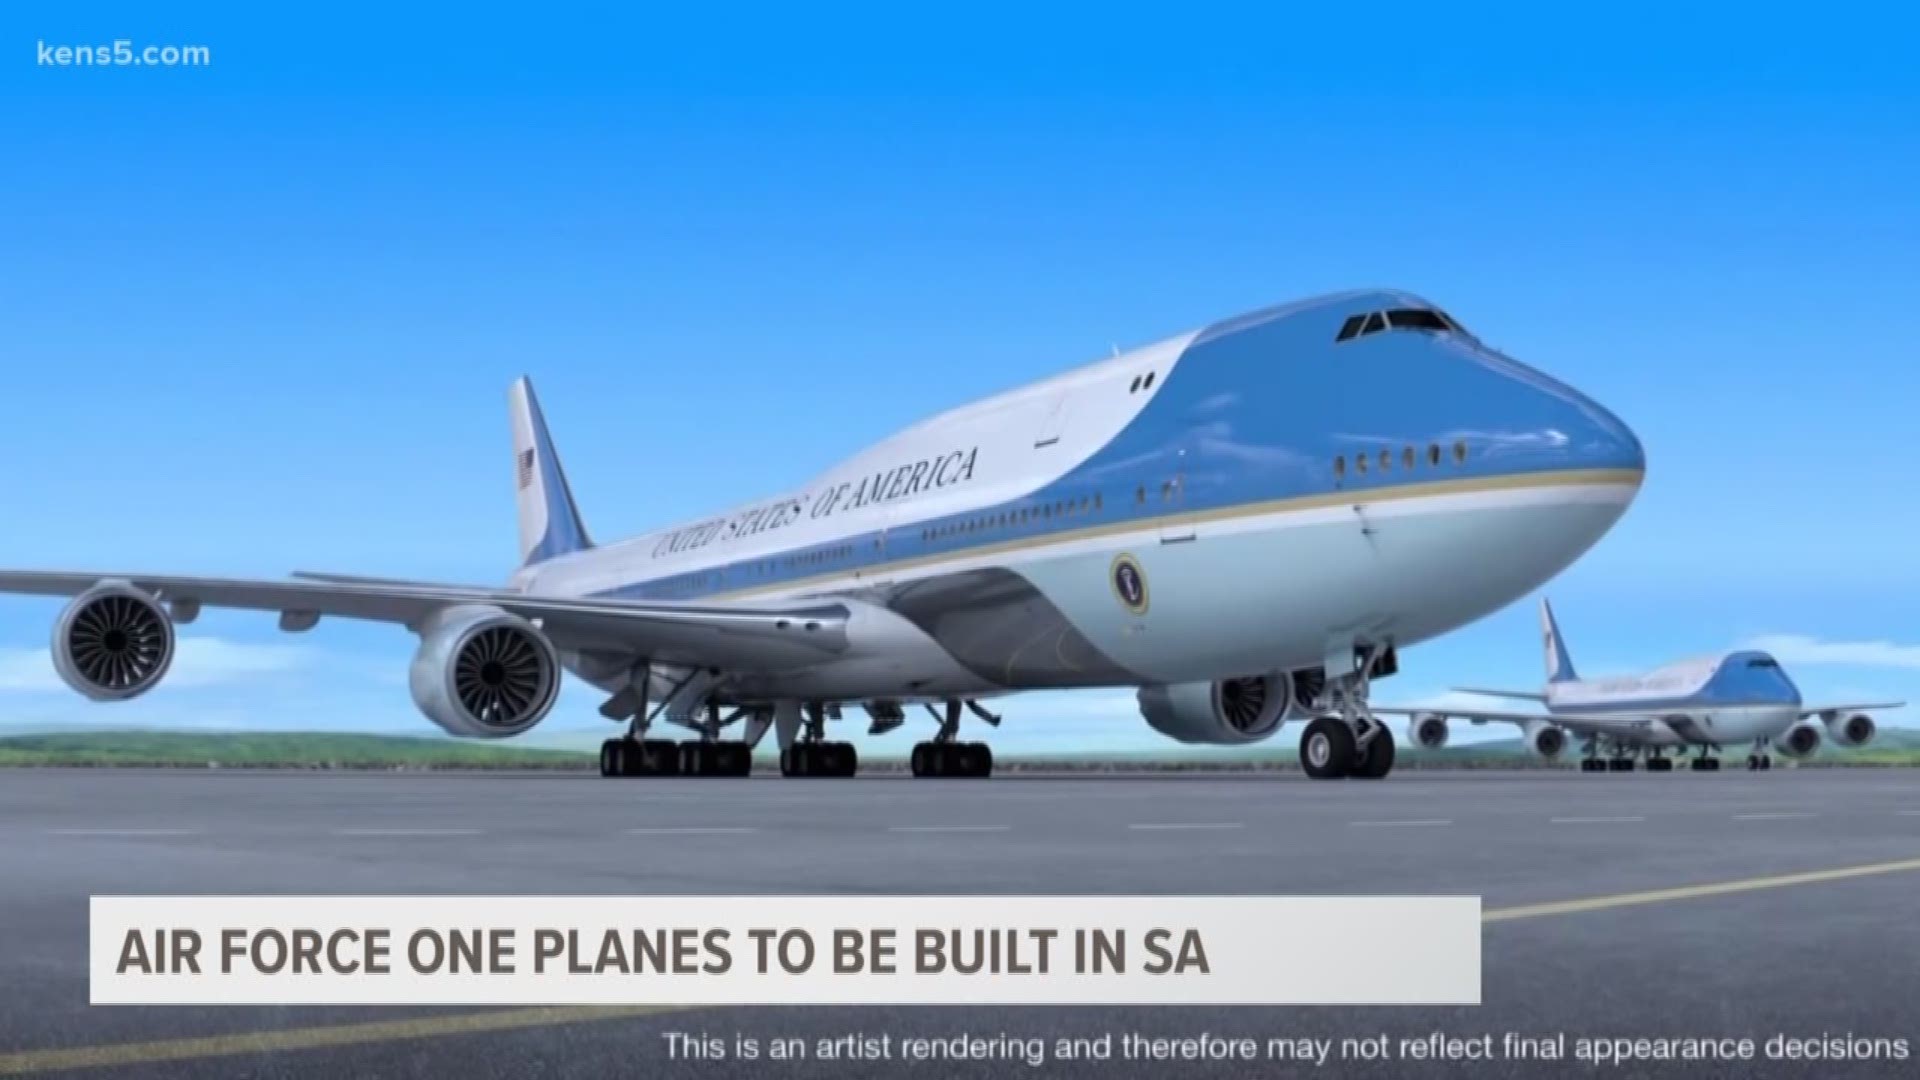 Boeing was awarded the contract for the project. It is expected to be finished in 2024.